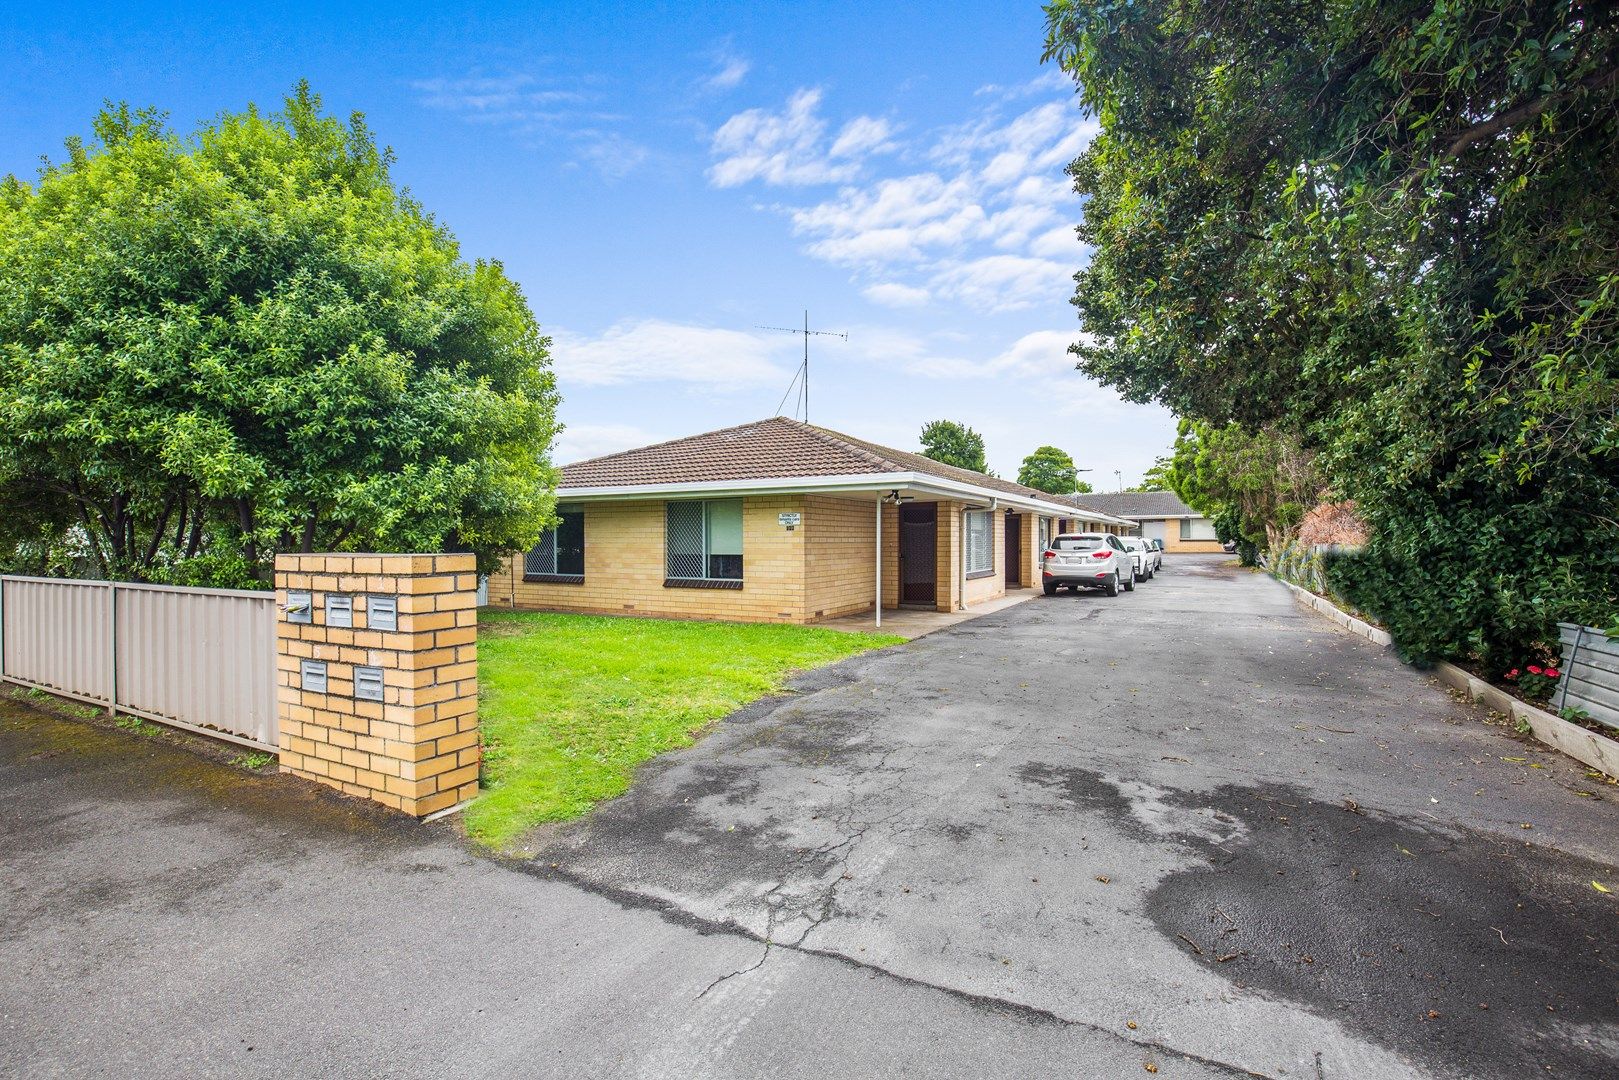 1-5 268 Commercial Street West, Mount Gambier SA 5290, Image 0